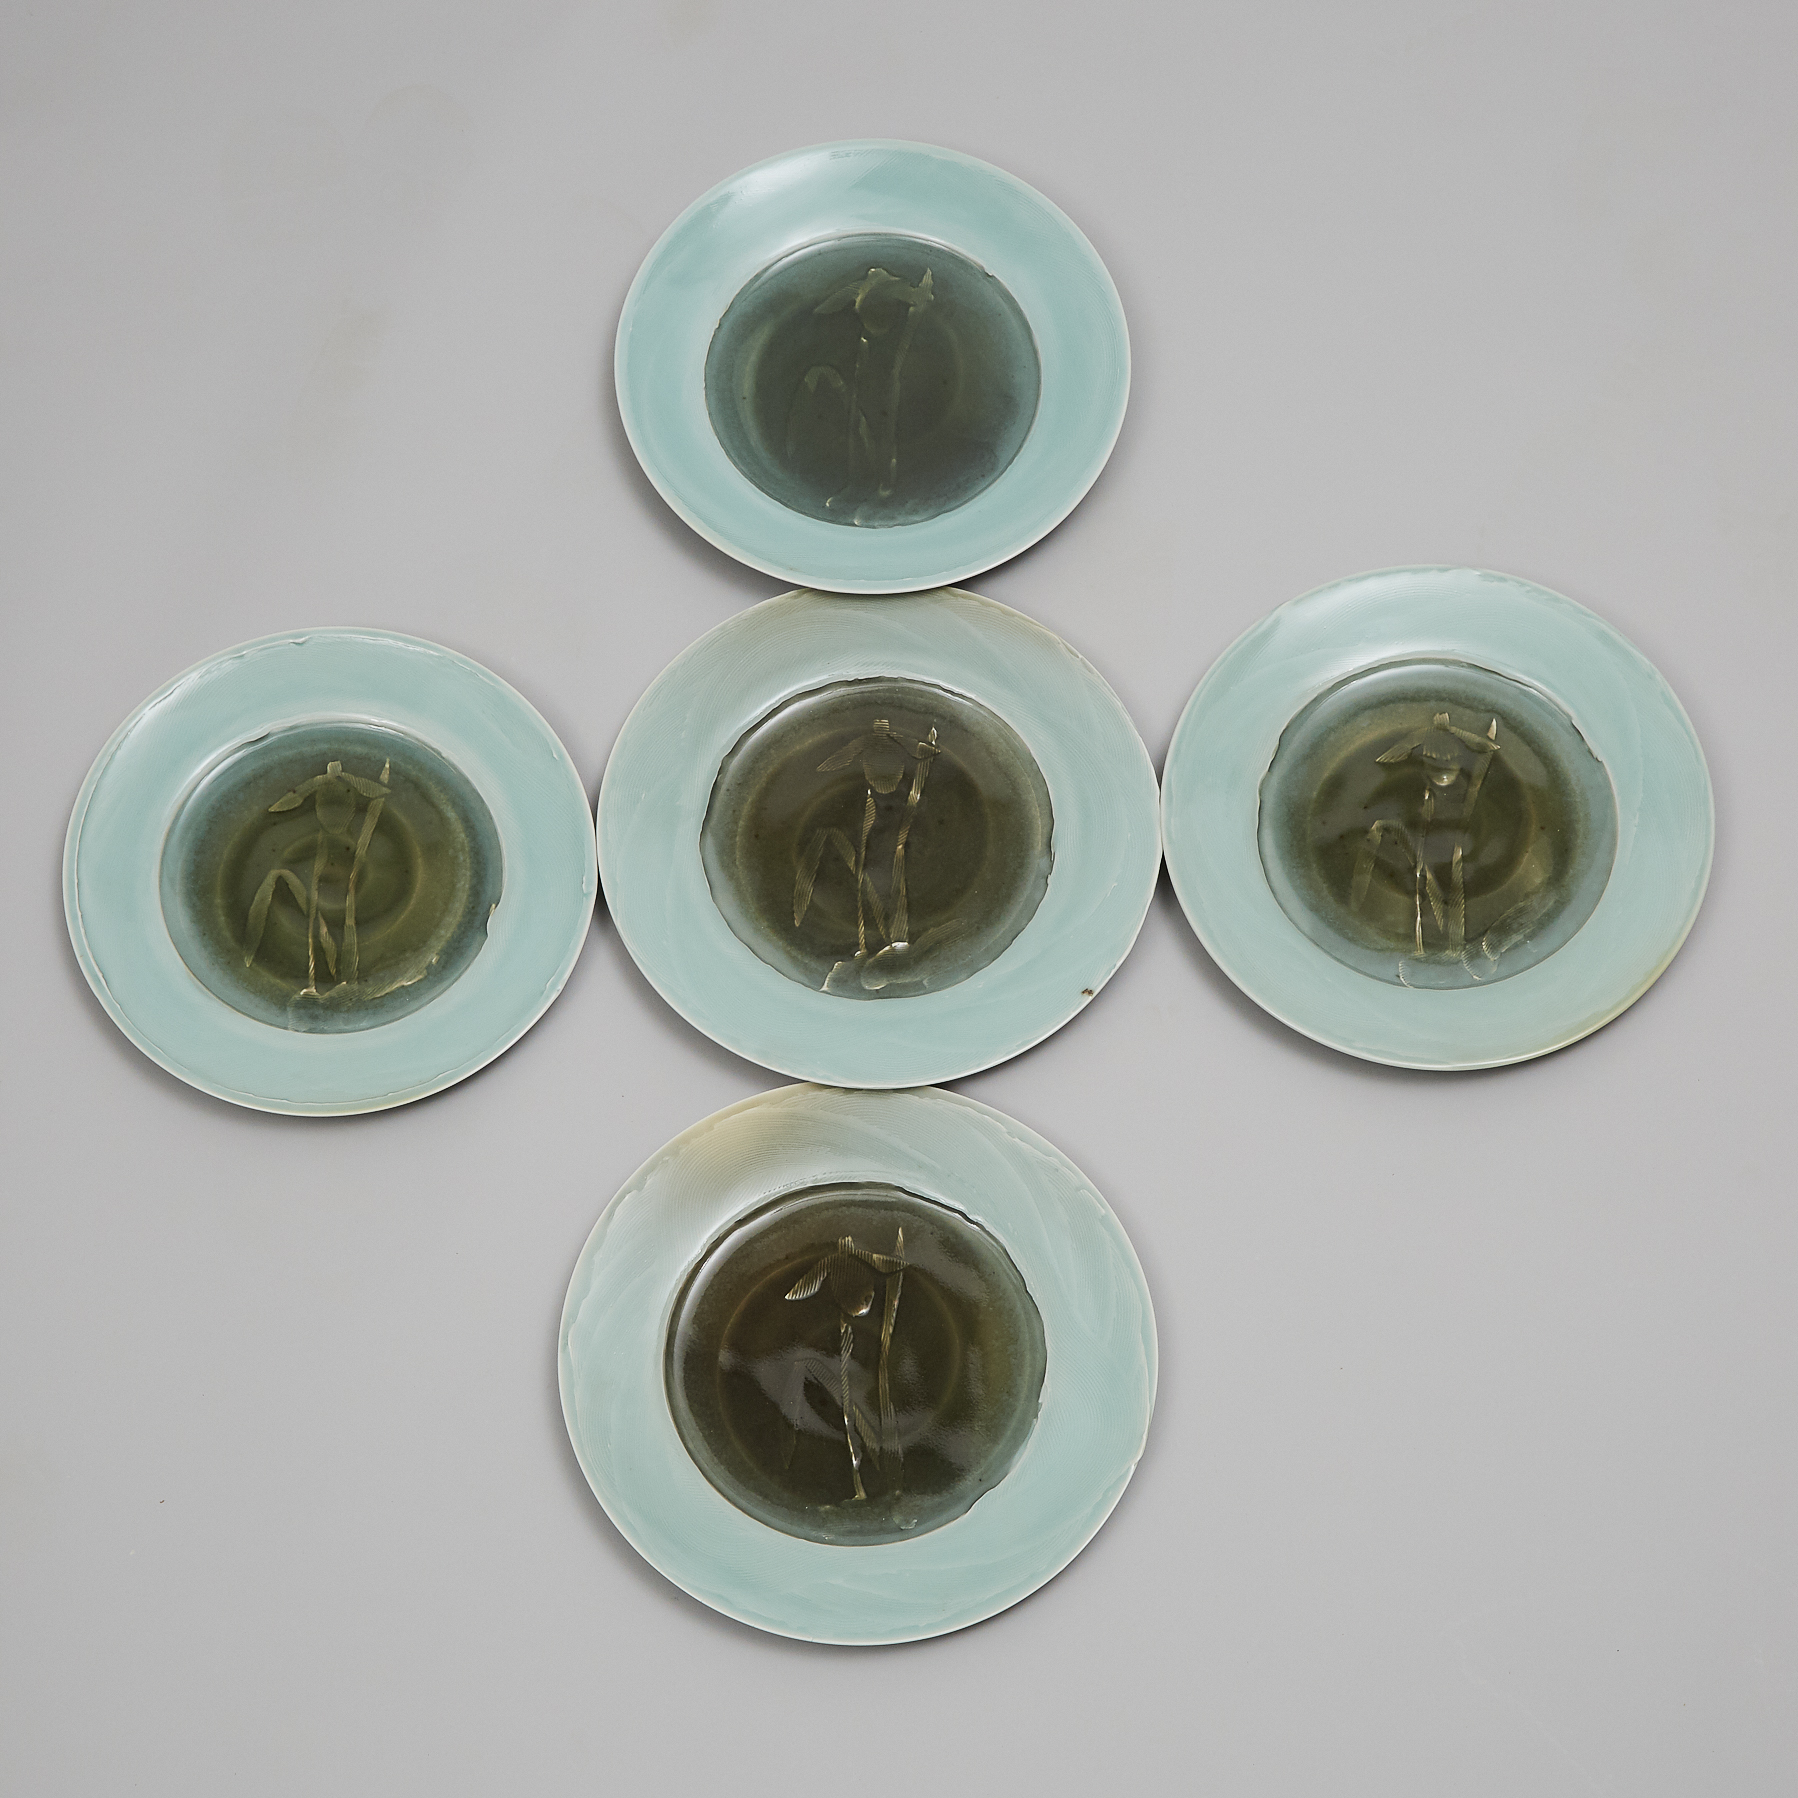 Harlan House (Canadian, b.1943), Five Celadon Glazed Chargers, 2002